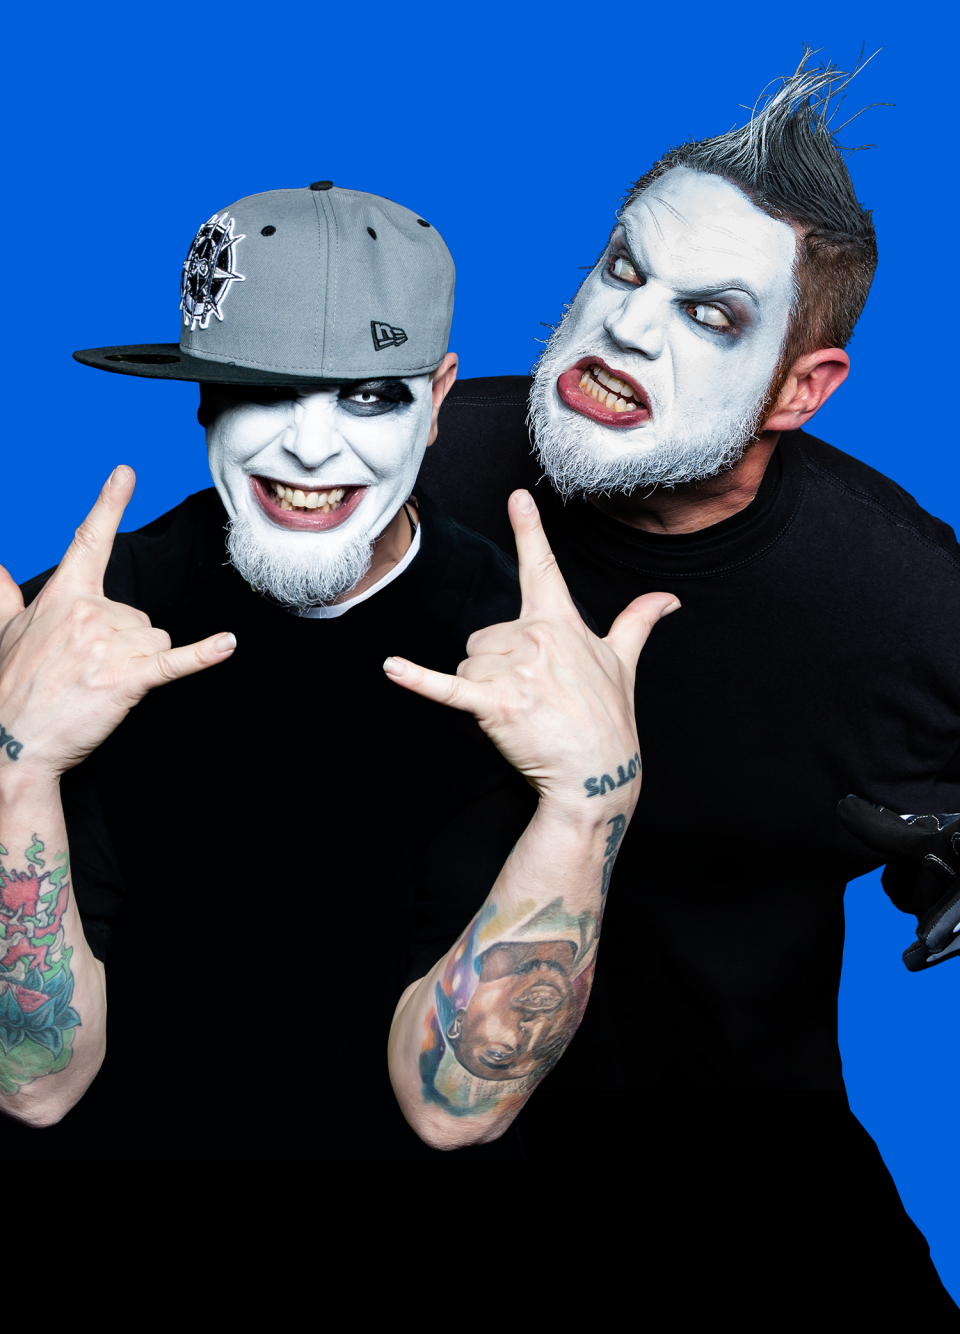 Twiztid will be at Astronomicon 6.